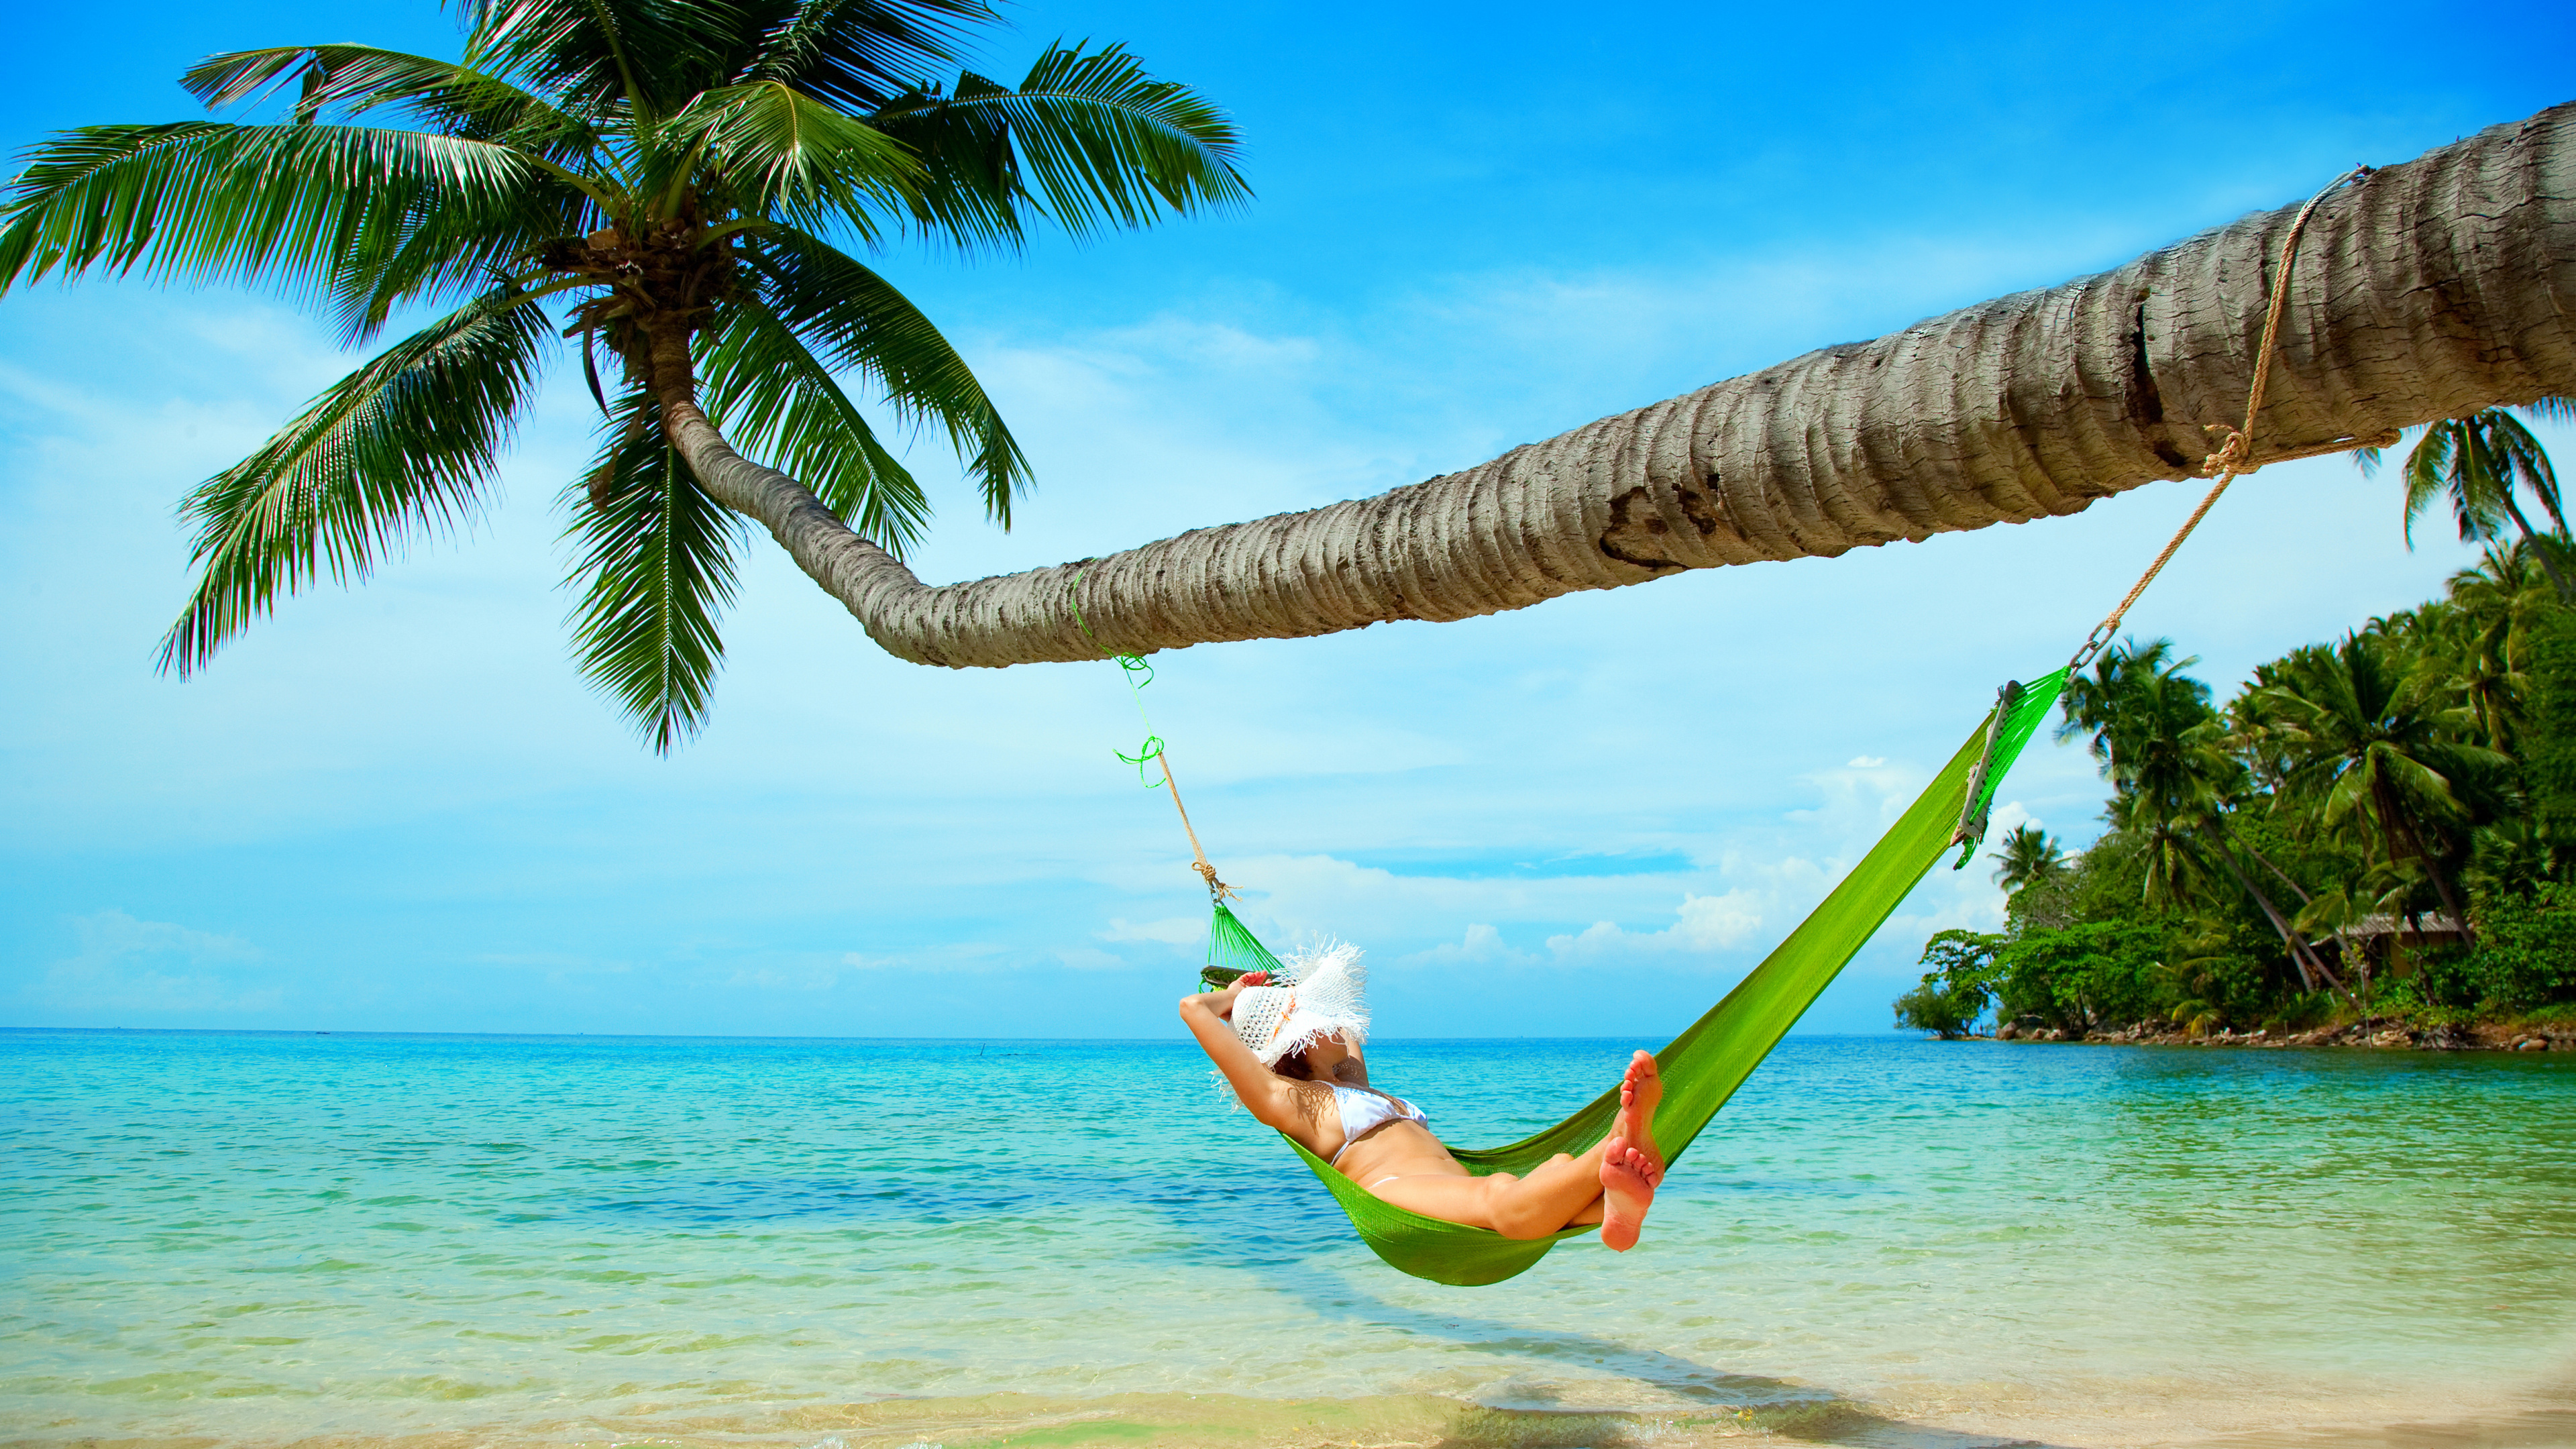 Woman in White Shirt and Green Shorts Lying on Hammock Under Coconut Tree During Daytime. Wallpaper in 3840x2160 Resolution